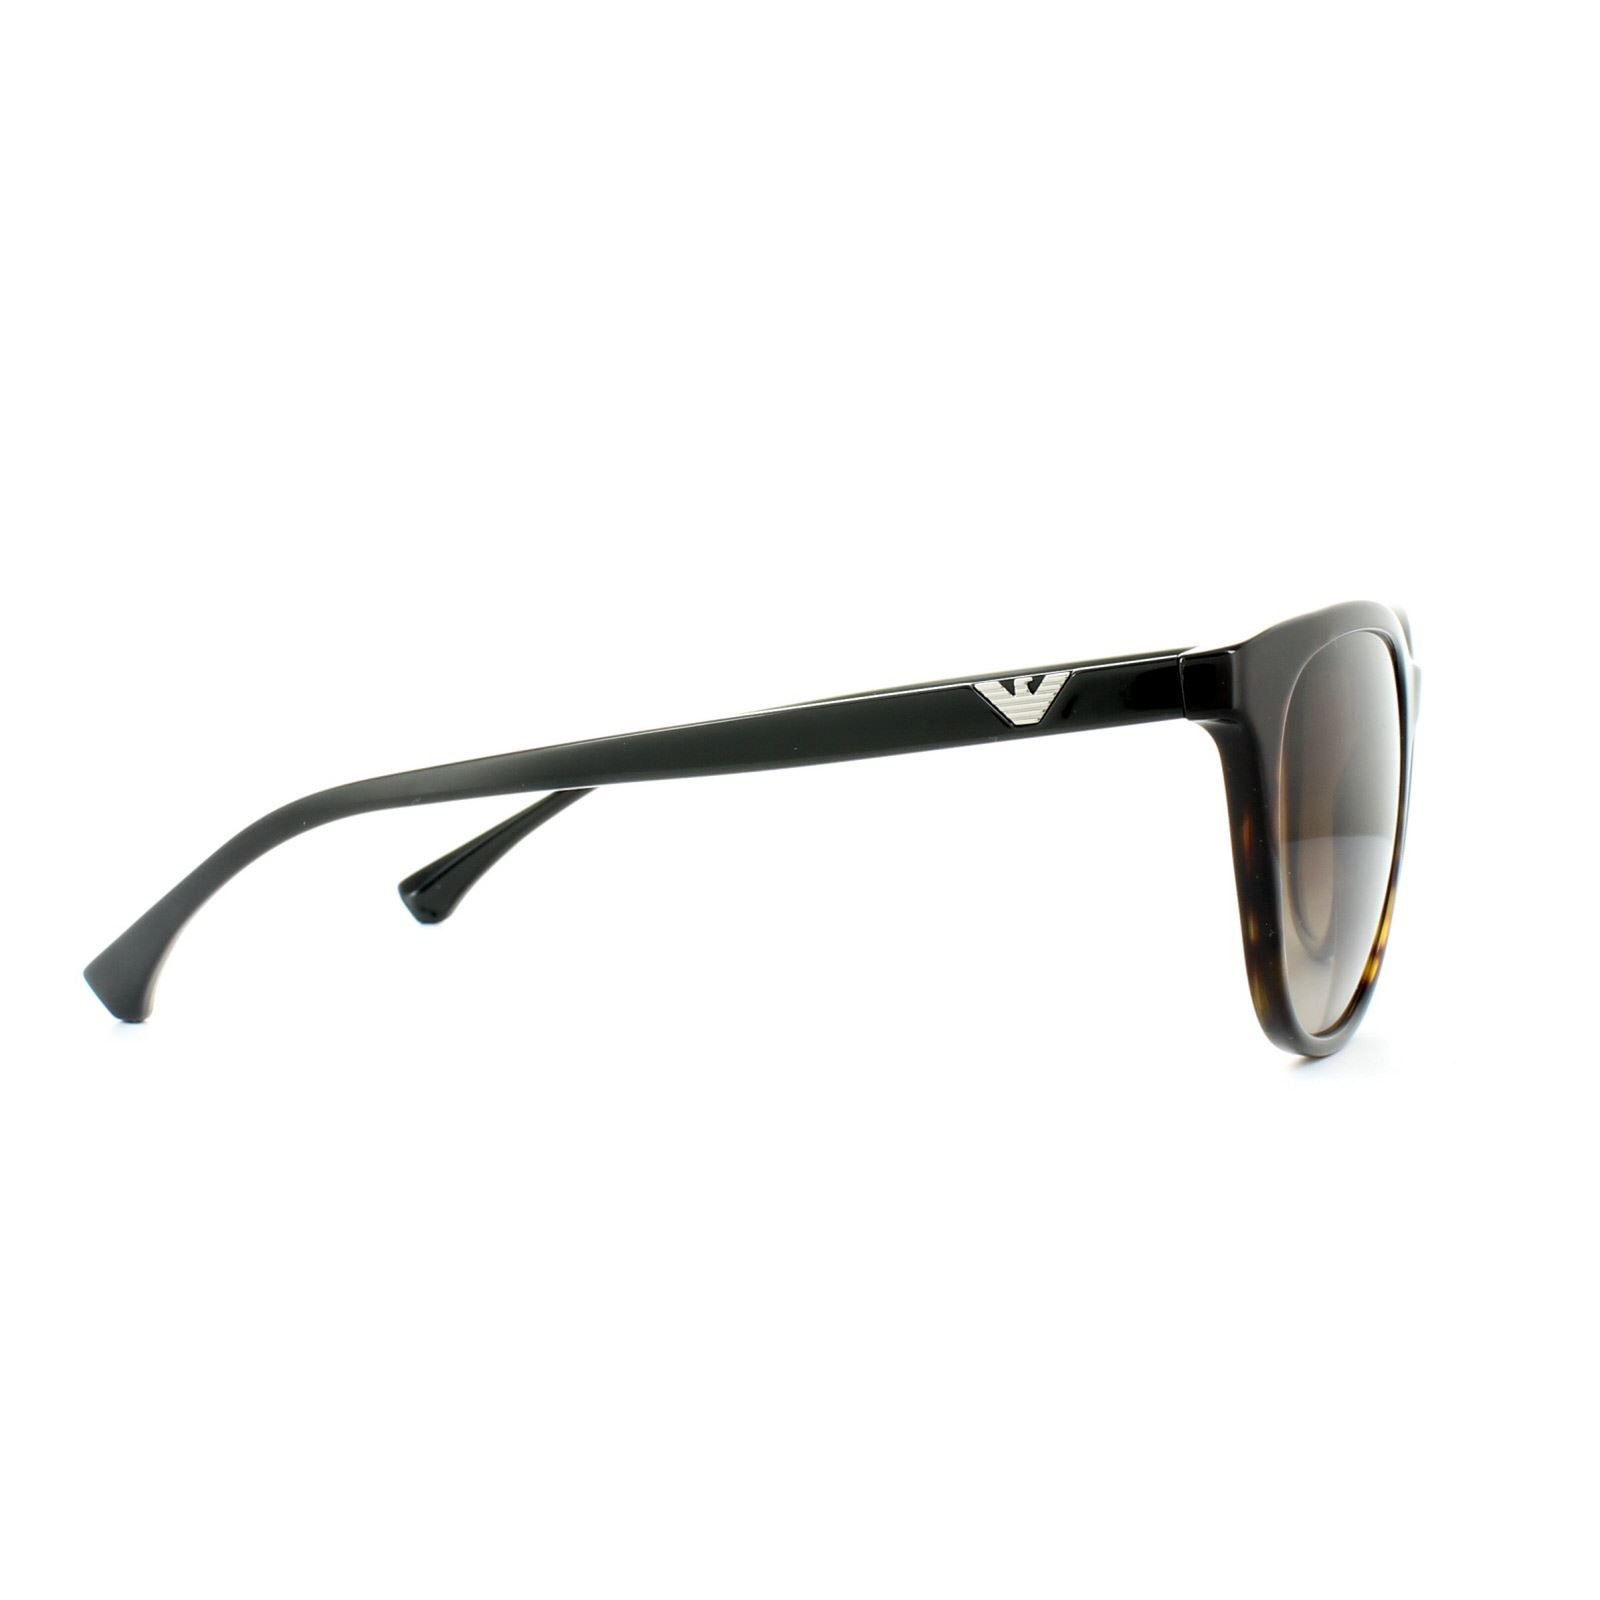 Emporio Armani Sunglasses 4086 5026/13 Dark Havana Brown Gradient are a lightweight square shaped acetate frame with minimalist styling for a sleek smooth look that will look great for all occasions. A simple Armani eagle logo on the temples adds authenticity.